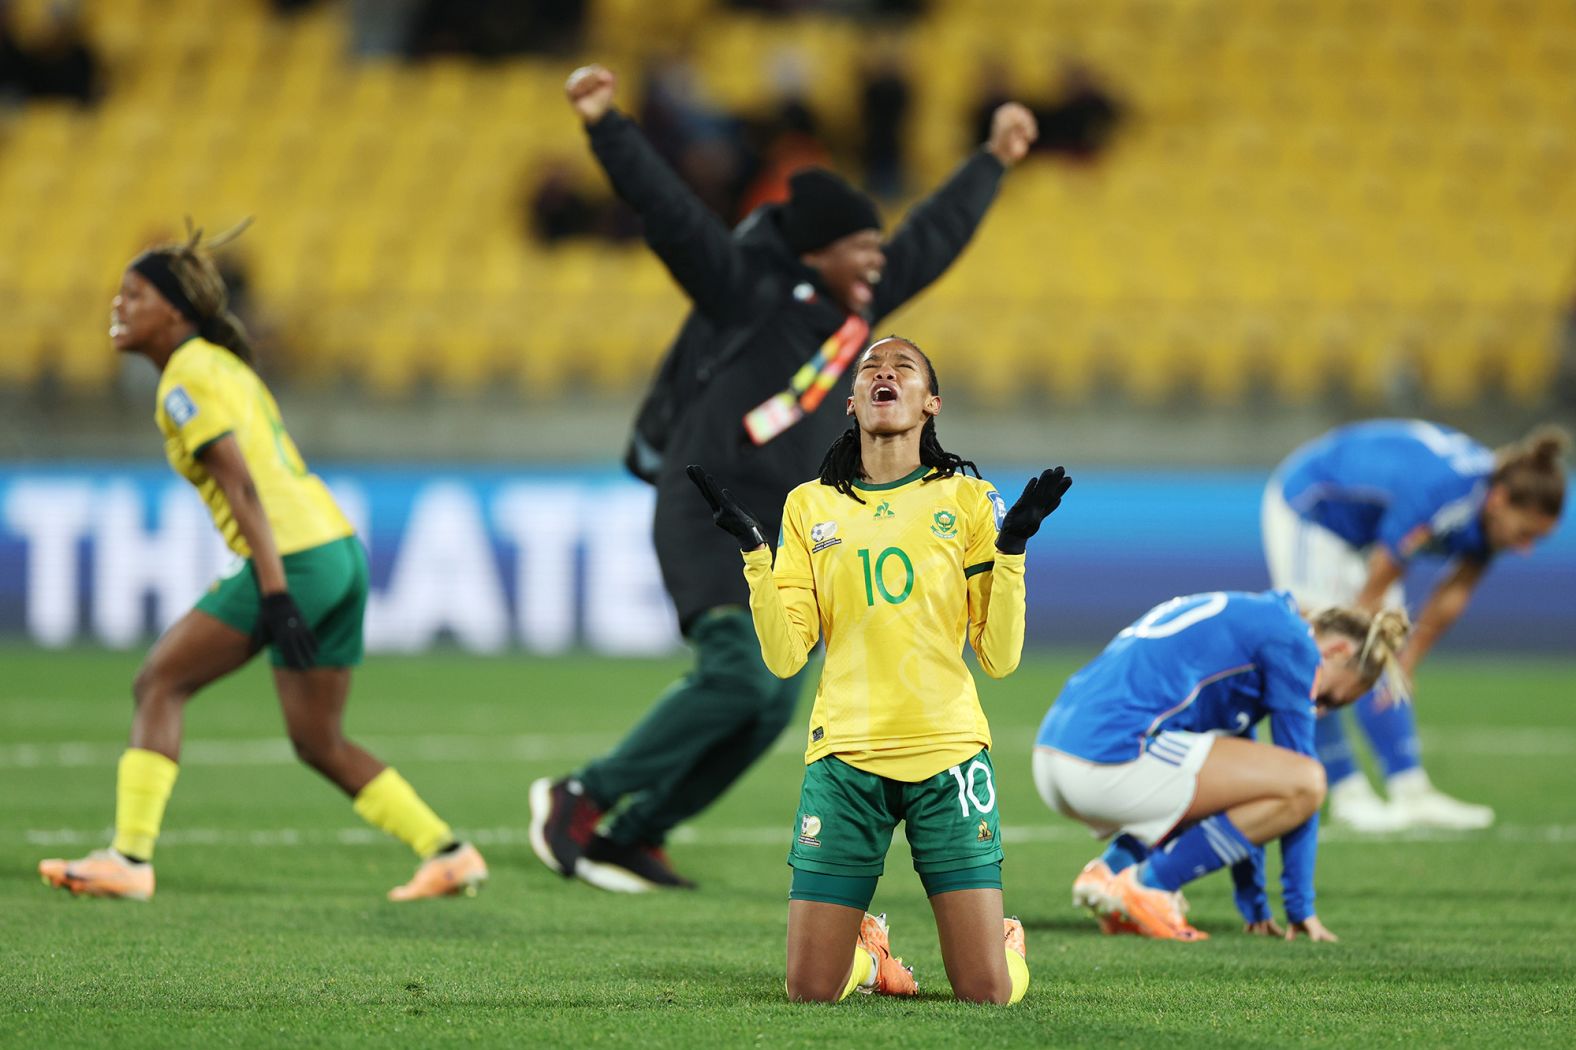 South Africa's Linda Motlhalo celebrates her team's <a href="index.php?page=&url=https%3A%2F%2Fwww.cnn.com%2F2023%2F08%2F02%2Ffootball%2Fsweden-south-africa-italy-womens-world-cup-2023-spt-intl%2Findex.html" target="_blank">3-2 win over Italy</a> on August 2. It was South Africa's first-ever win at a Women's World Cup, and it helped them clinch a spot in the next round. Italy was eliminated with the loss.